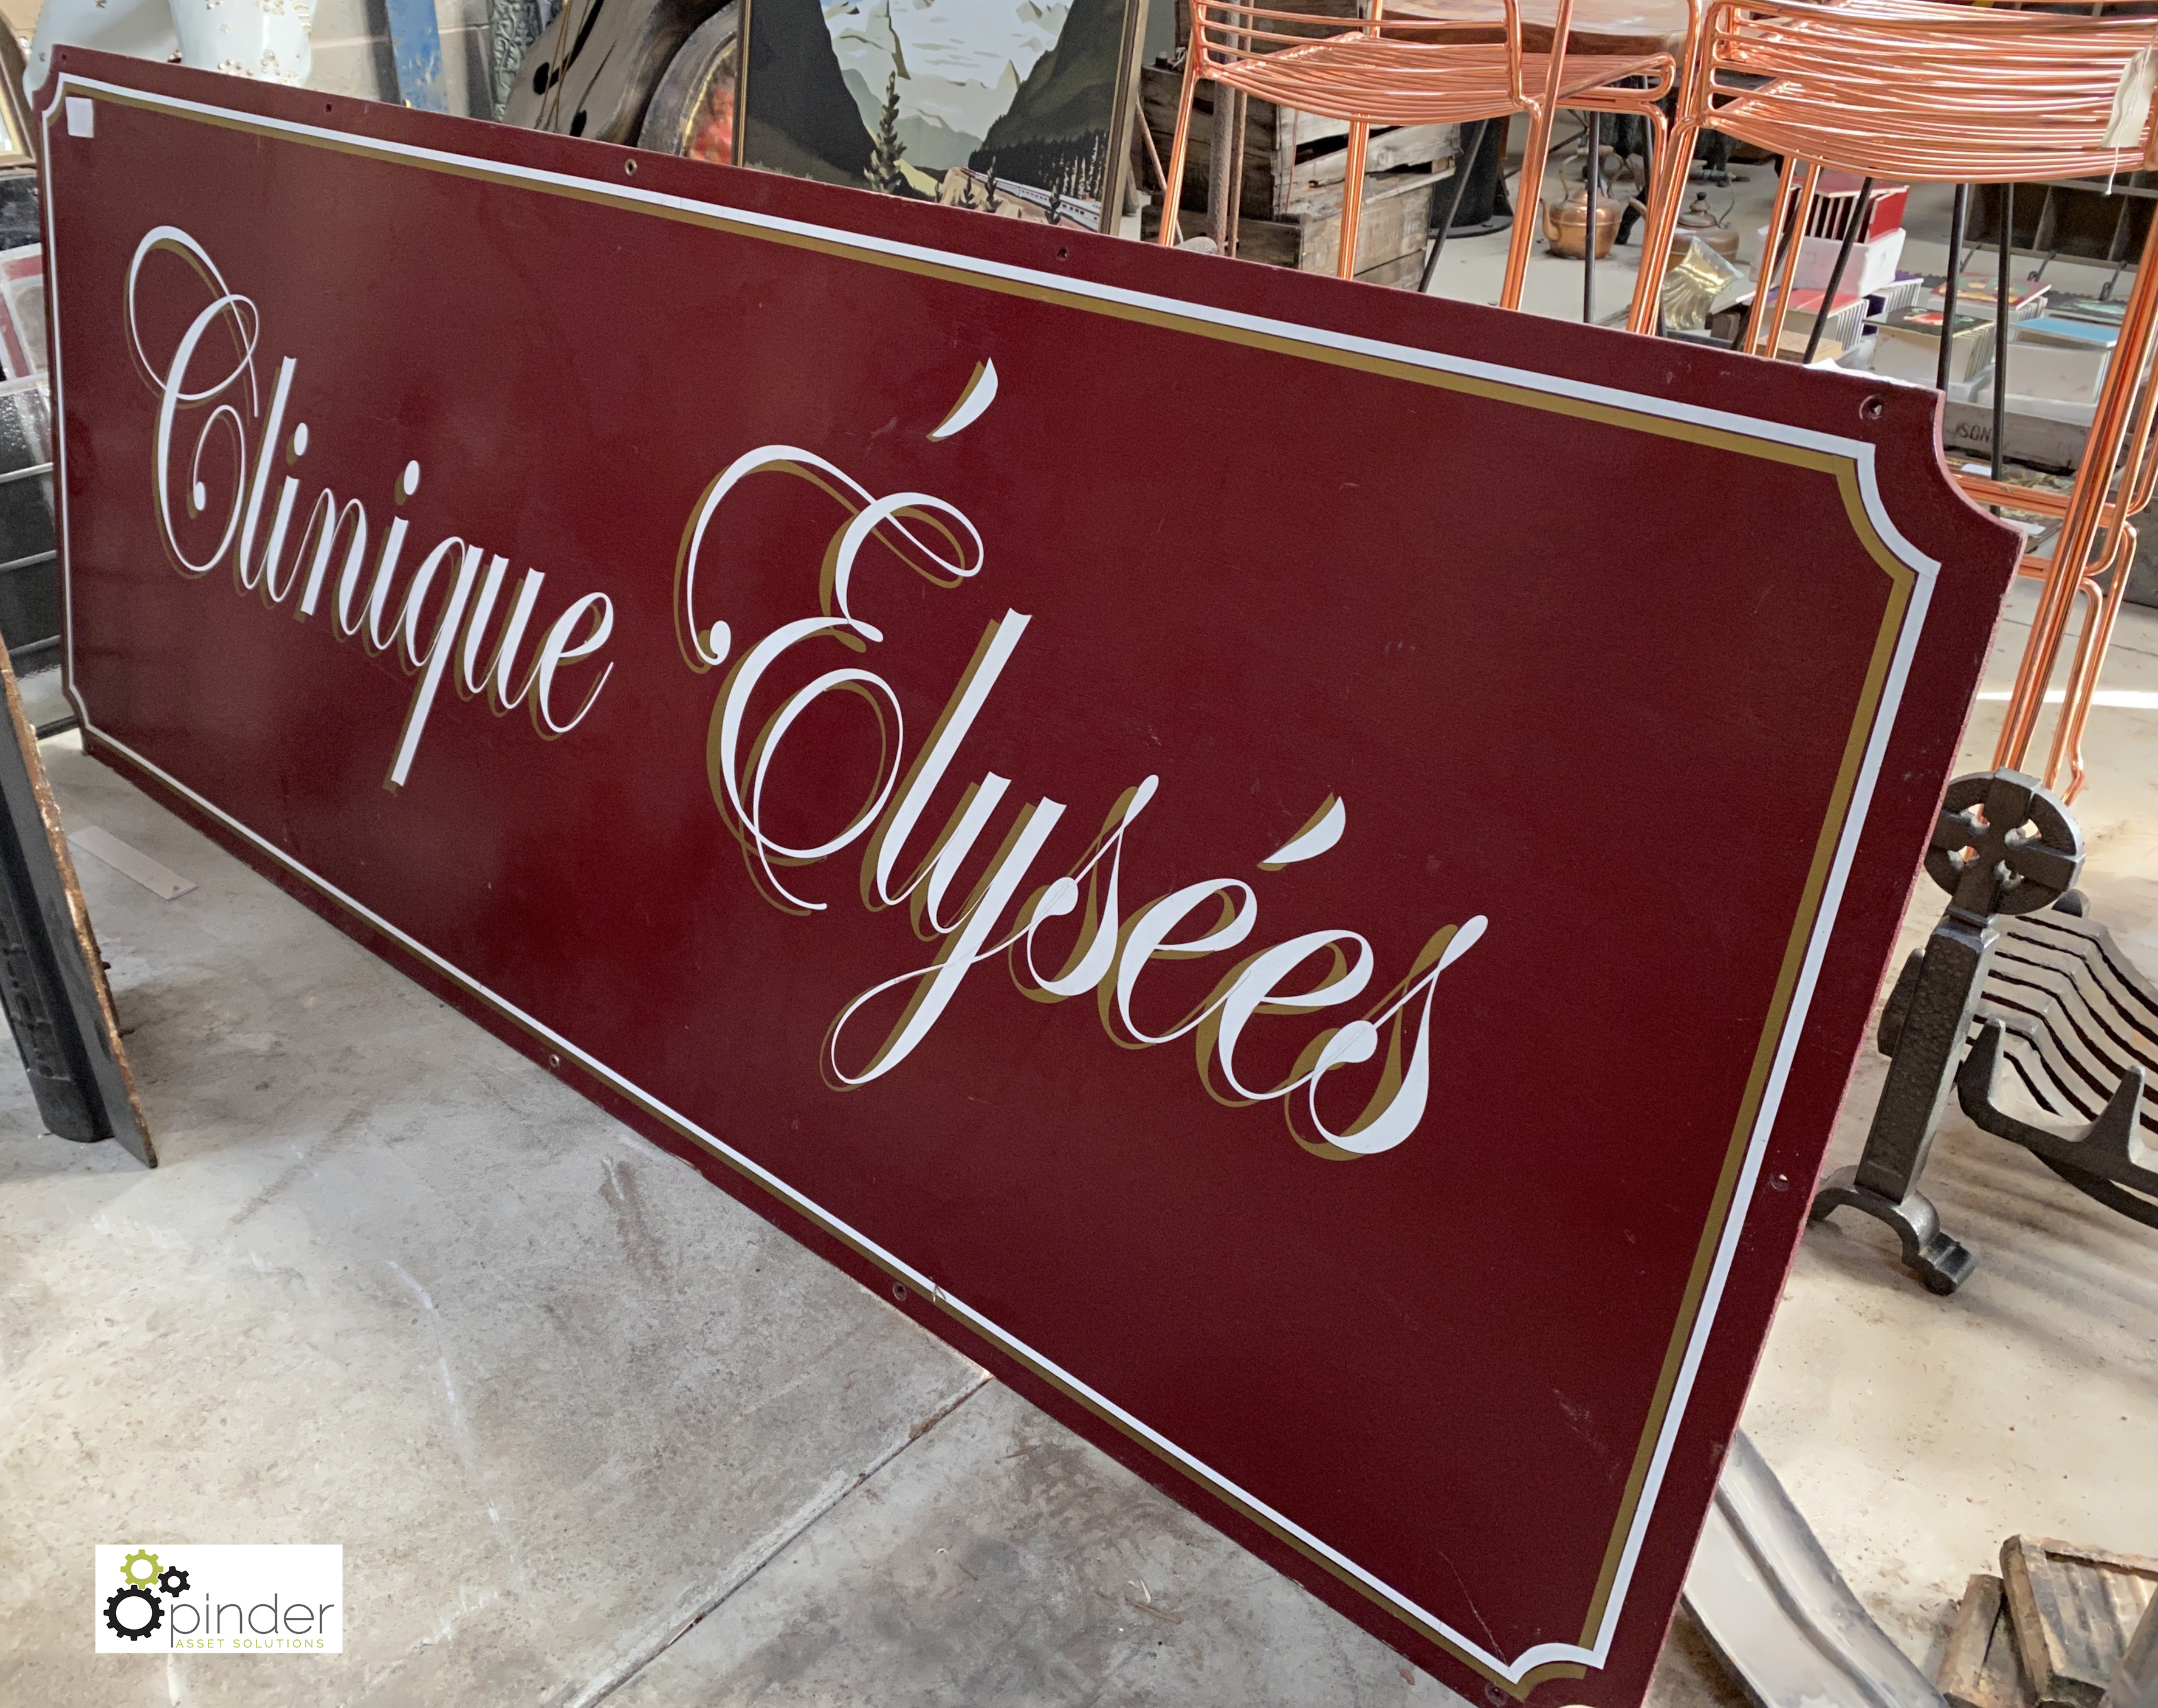 A wooden painted French Advertising Sign ‘Clinique Elysees’, 800mm high x 2010mm long